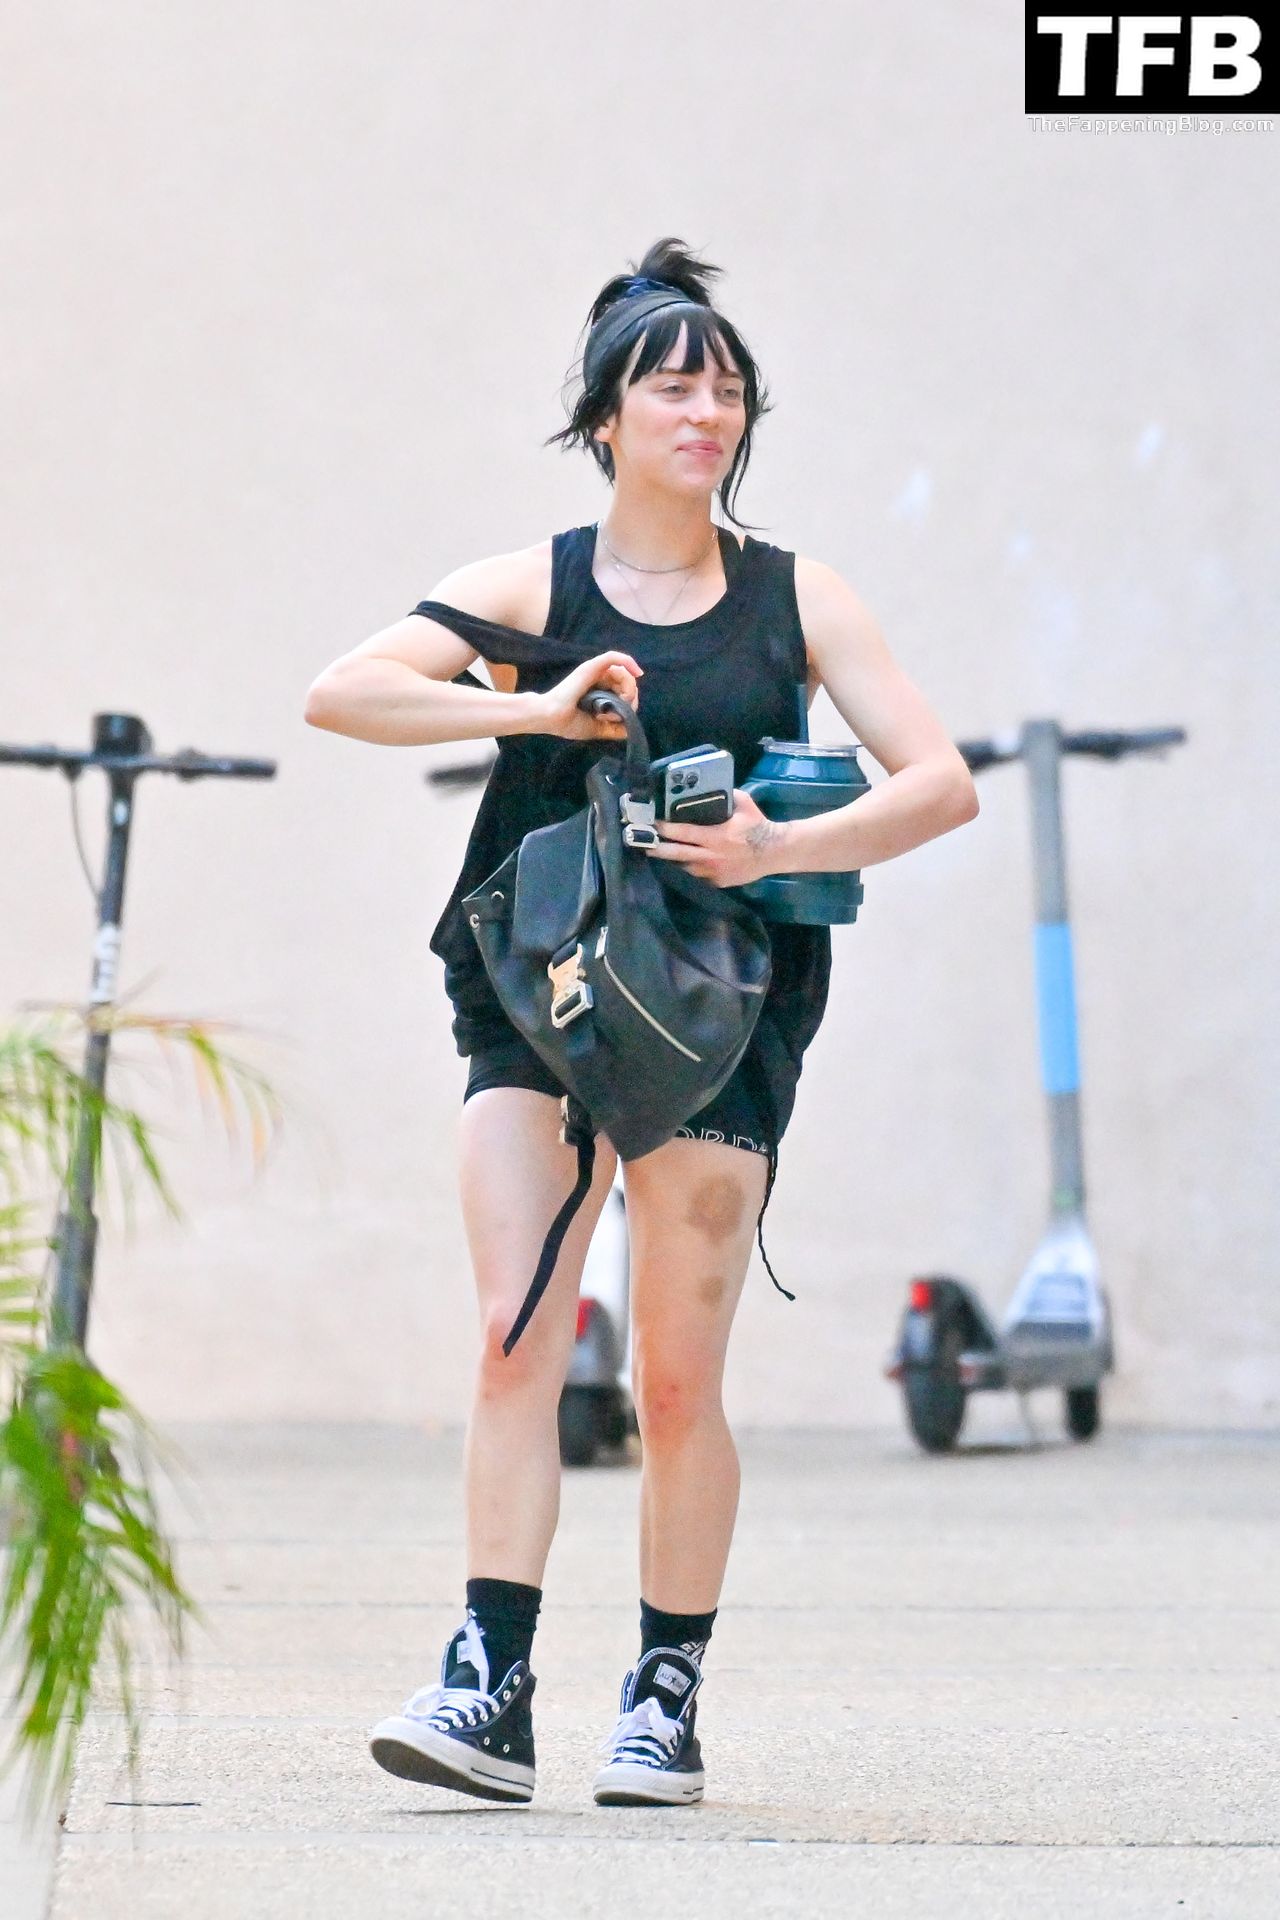 Billie Eilish Sexy The Fappening Blog 8 - Billie Eilish Keeps Up Her Fitness Regime, Stepping Out For Another Workout in Studio City (26 Photos)